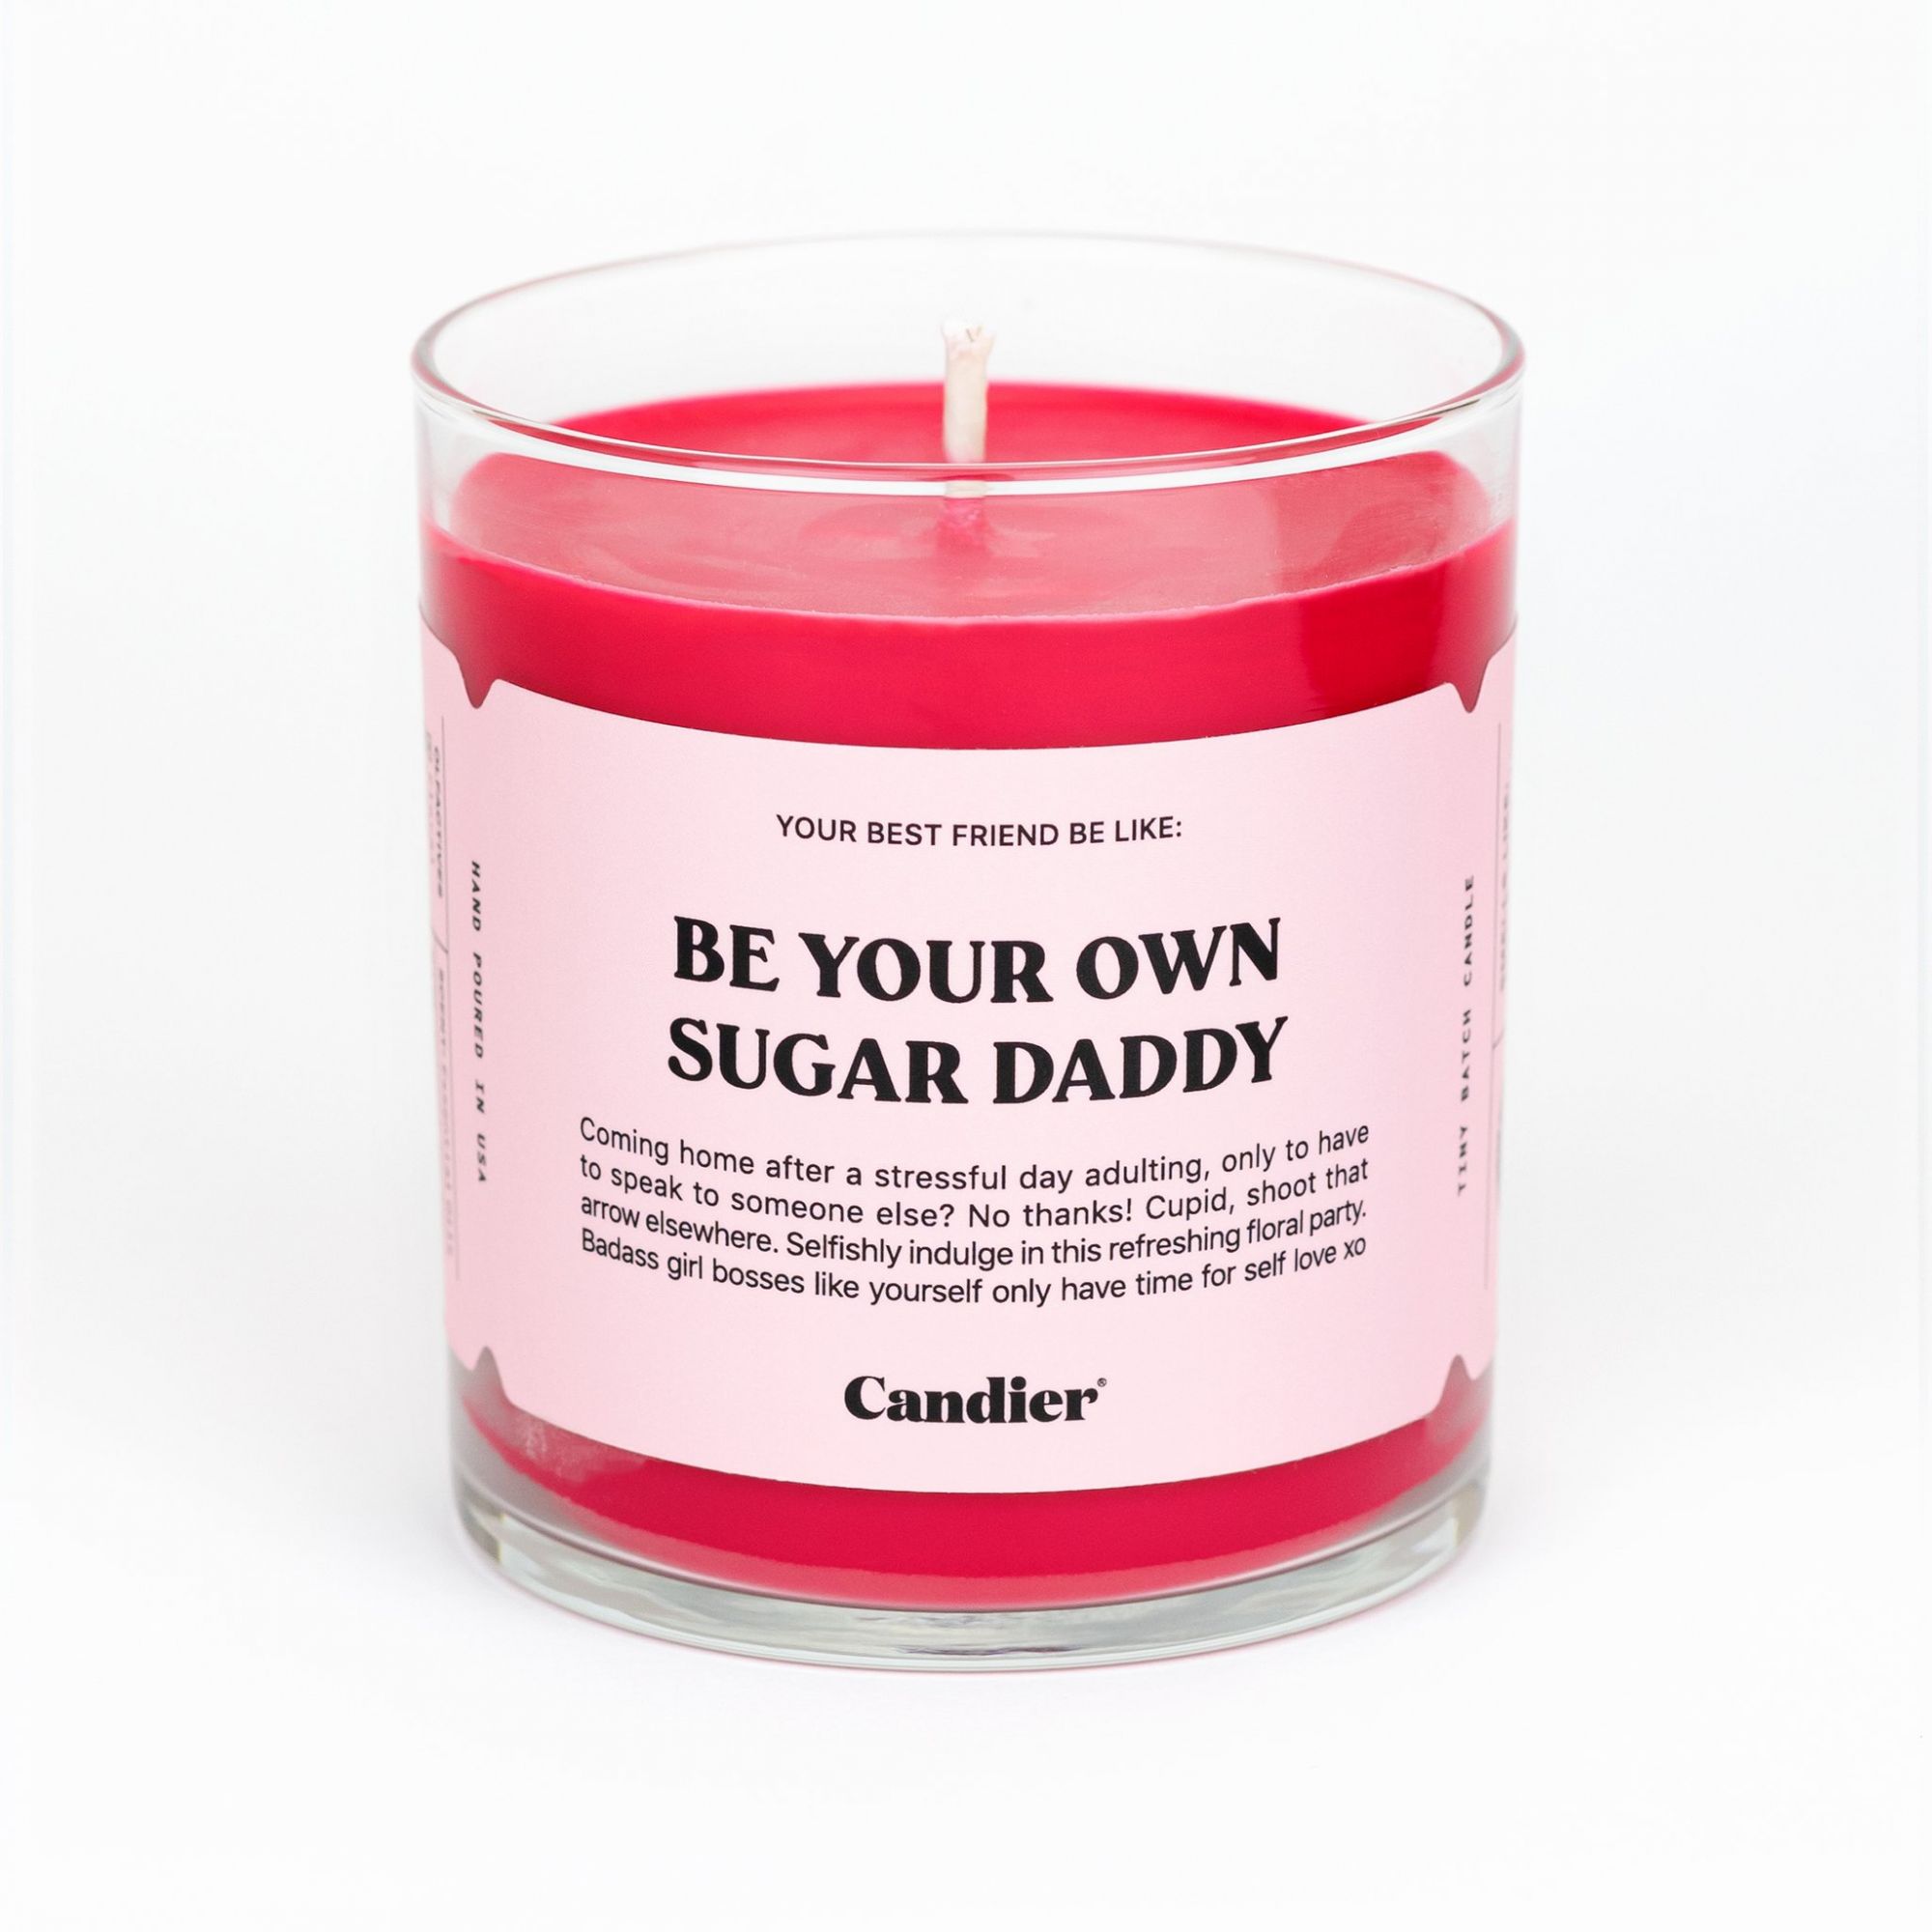 A pink candle called Be Your Own Sugar Daddy.